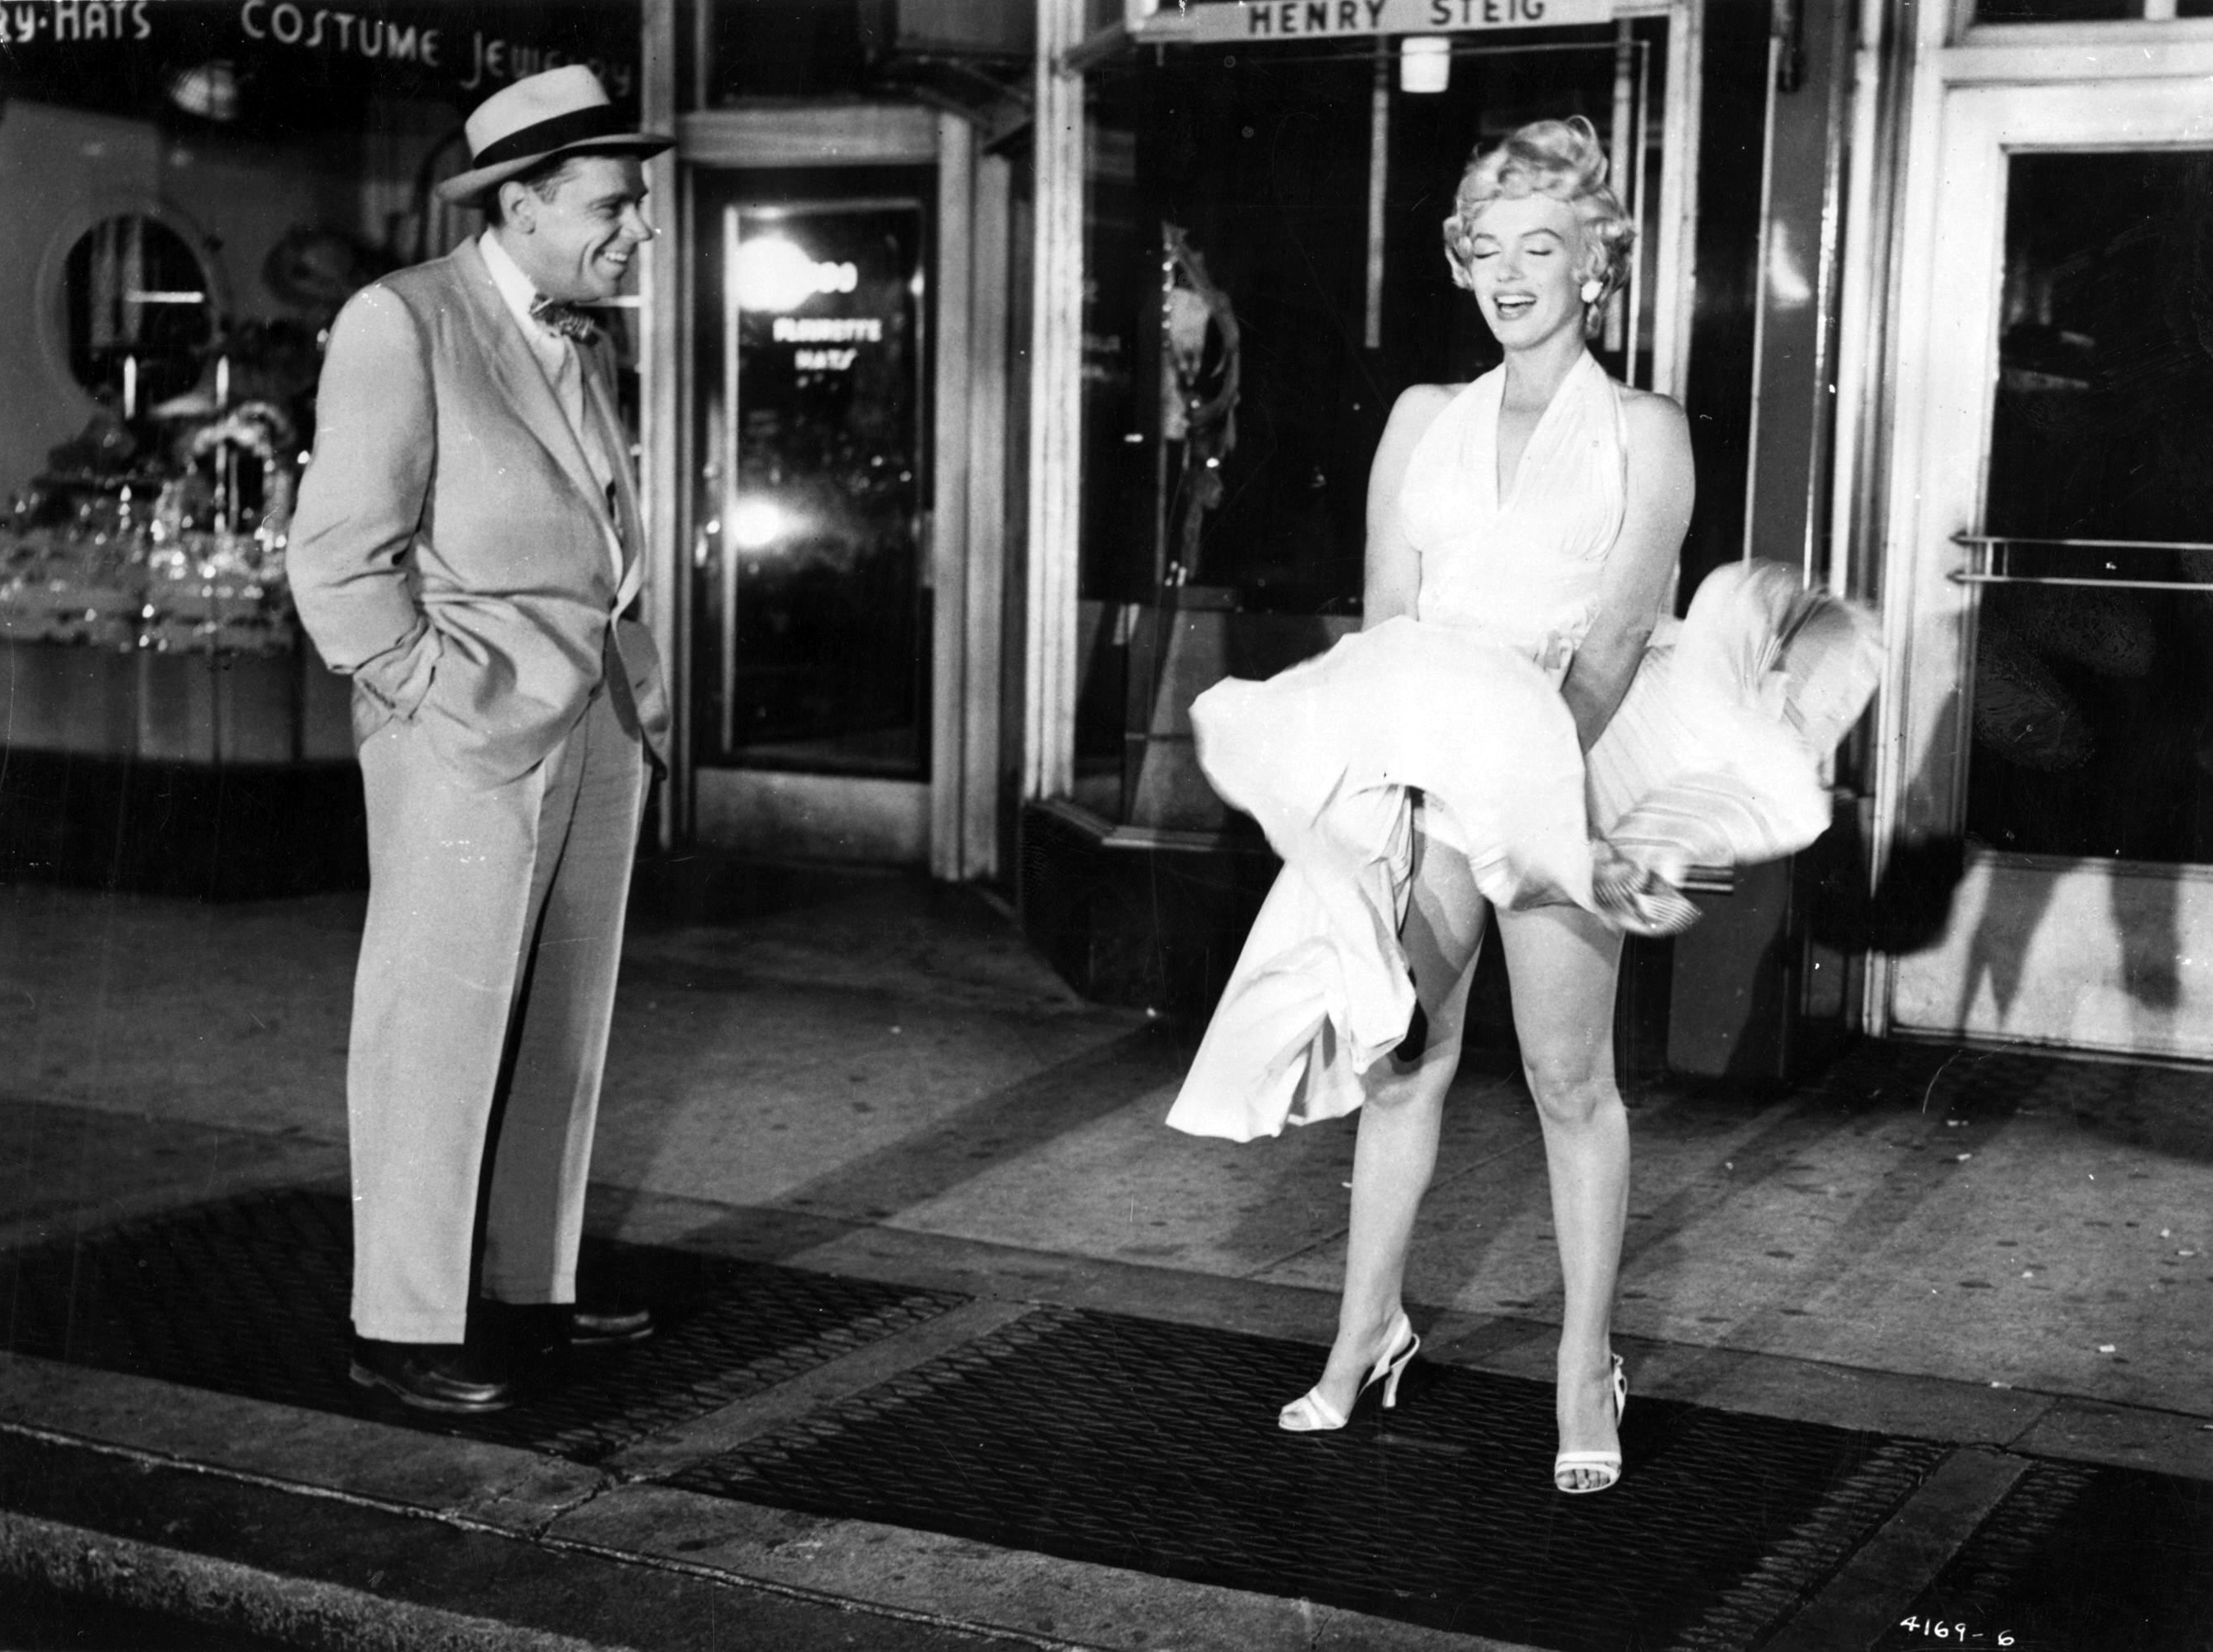 Seven Year Itch, The